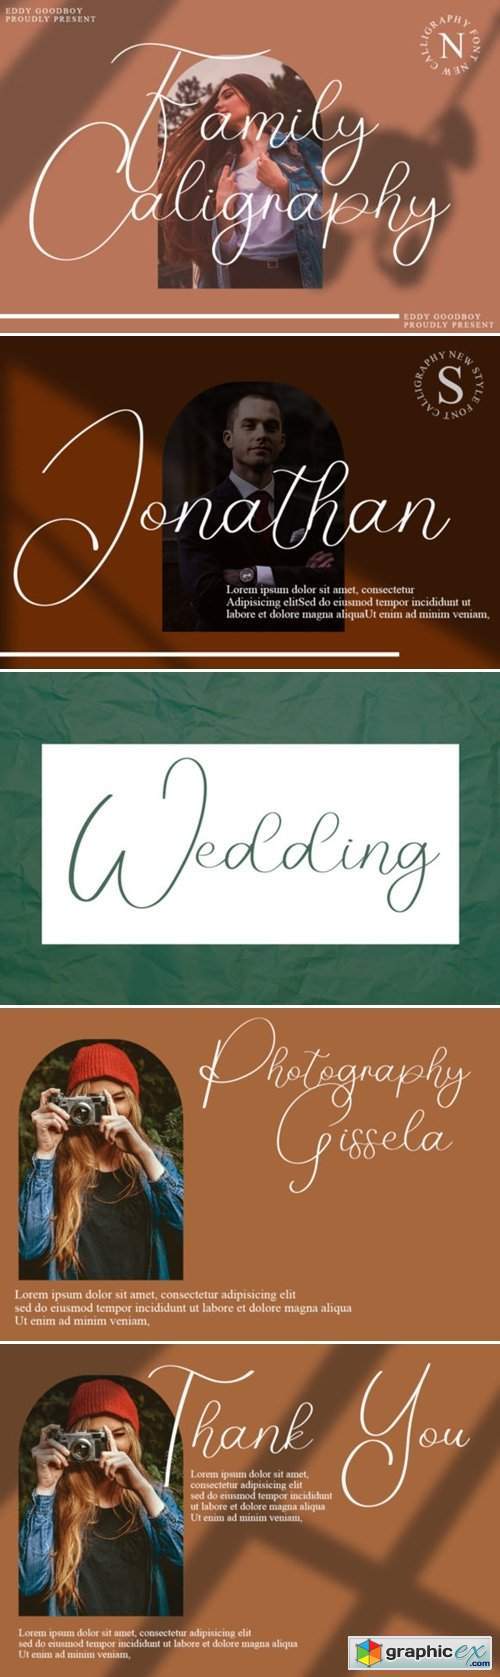 Family Caligraphy Font